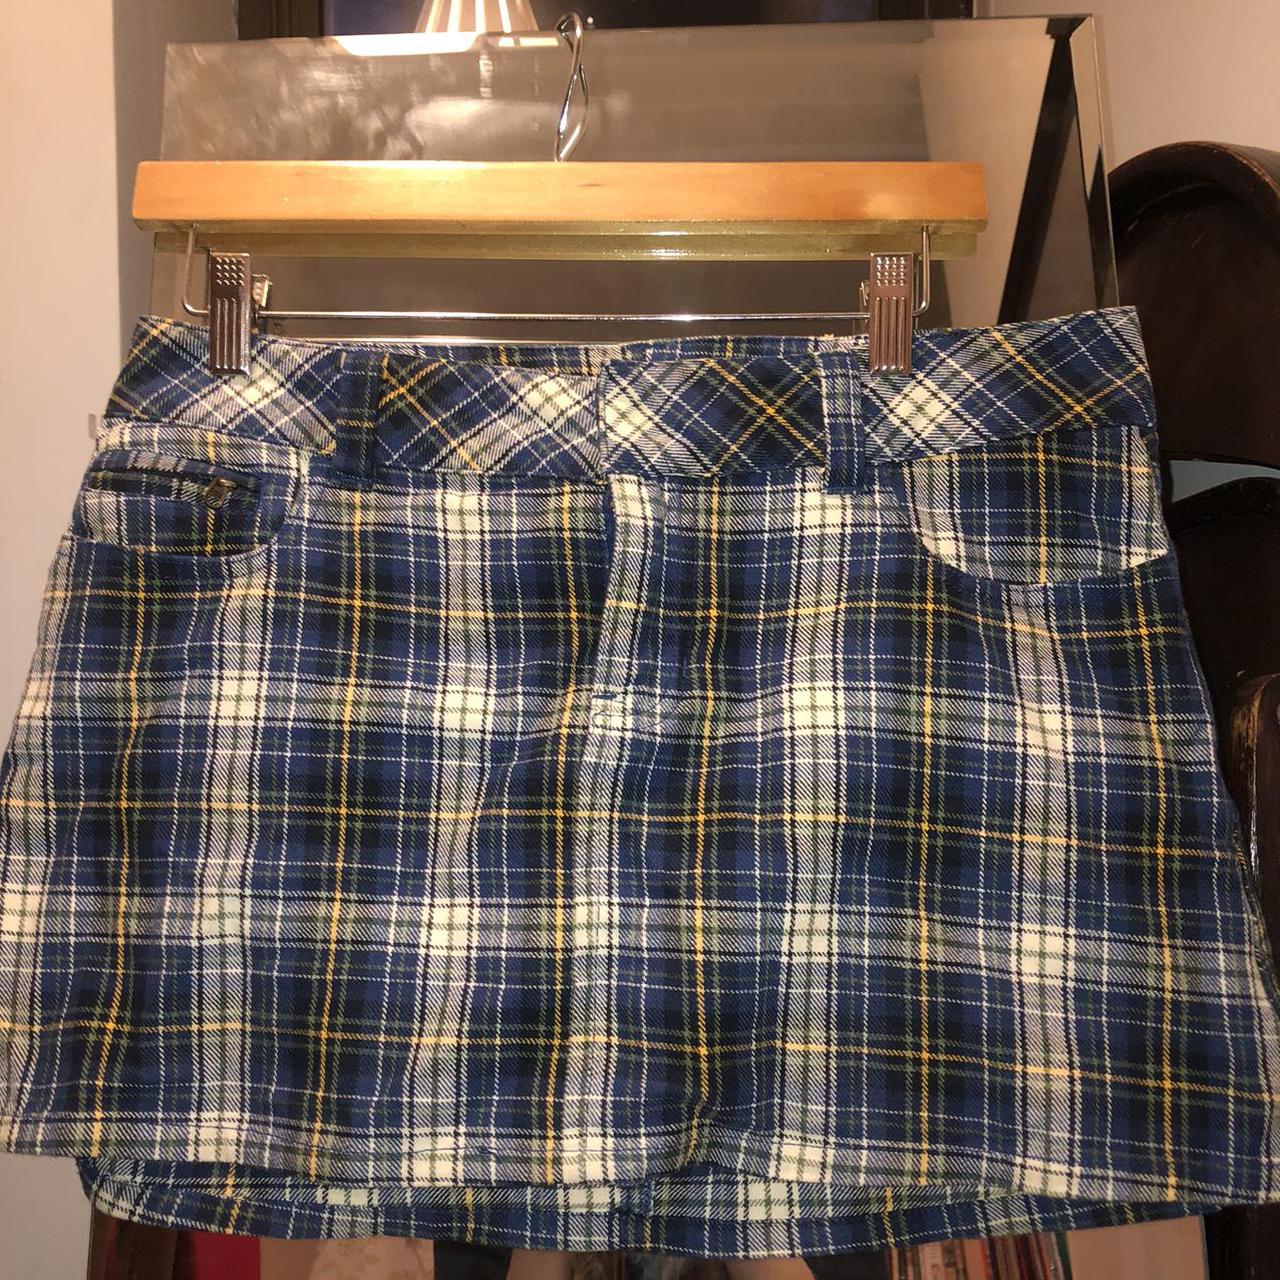 Abercrombie & Fitch Women's Yellow and Blue Skirt (3)